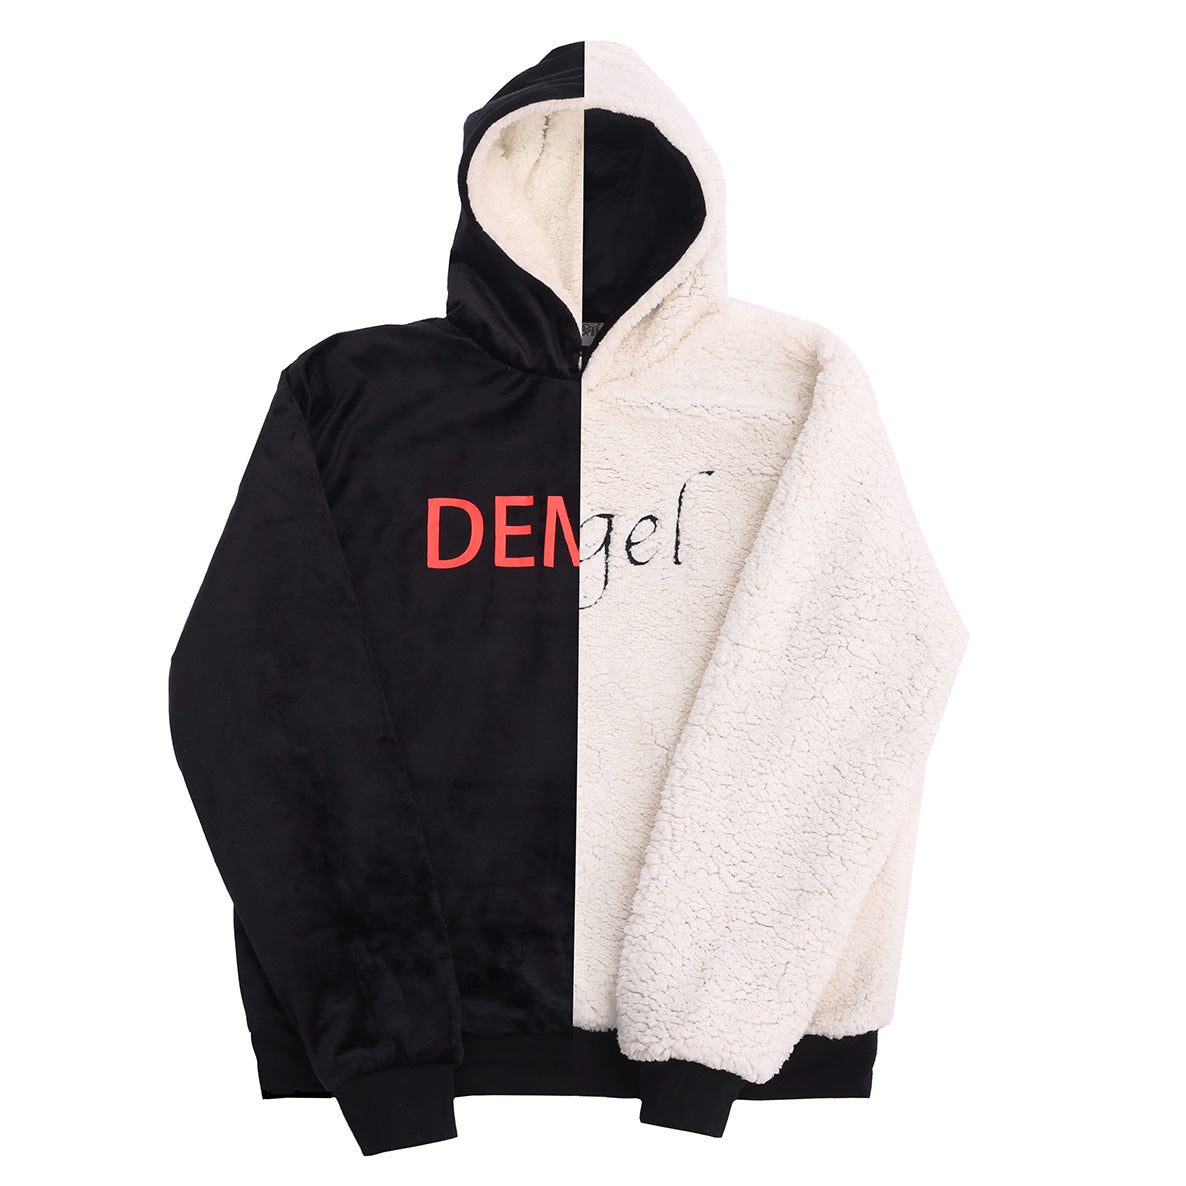 best place to get cheap hoodies